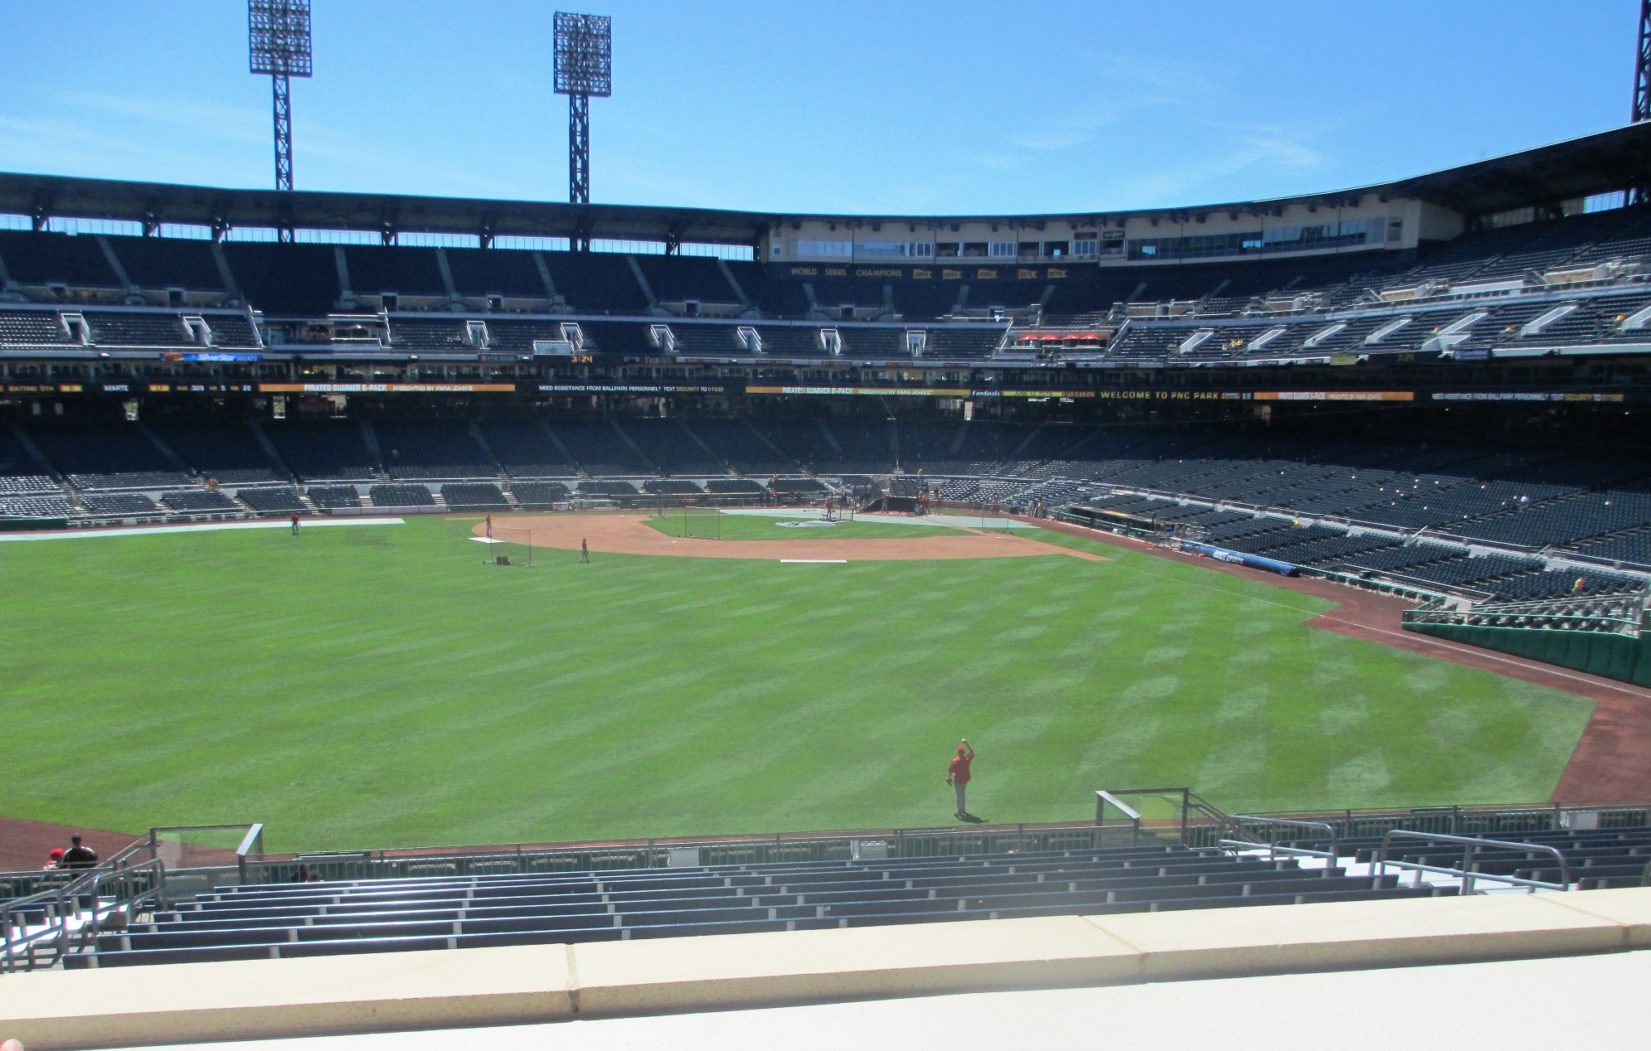 PNC Park Seating Guide: Best Pittsburgh Pirates Seats